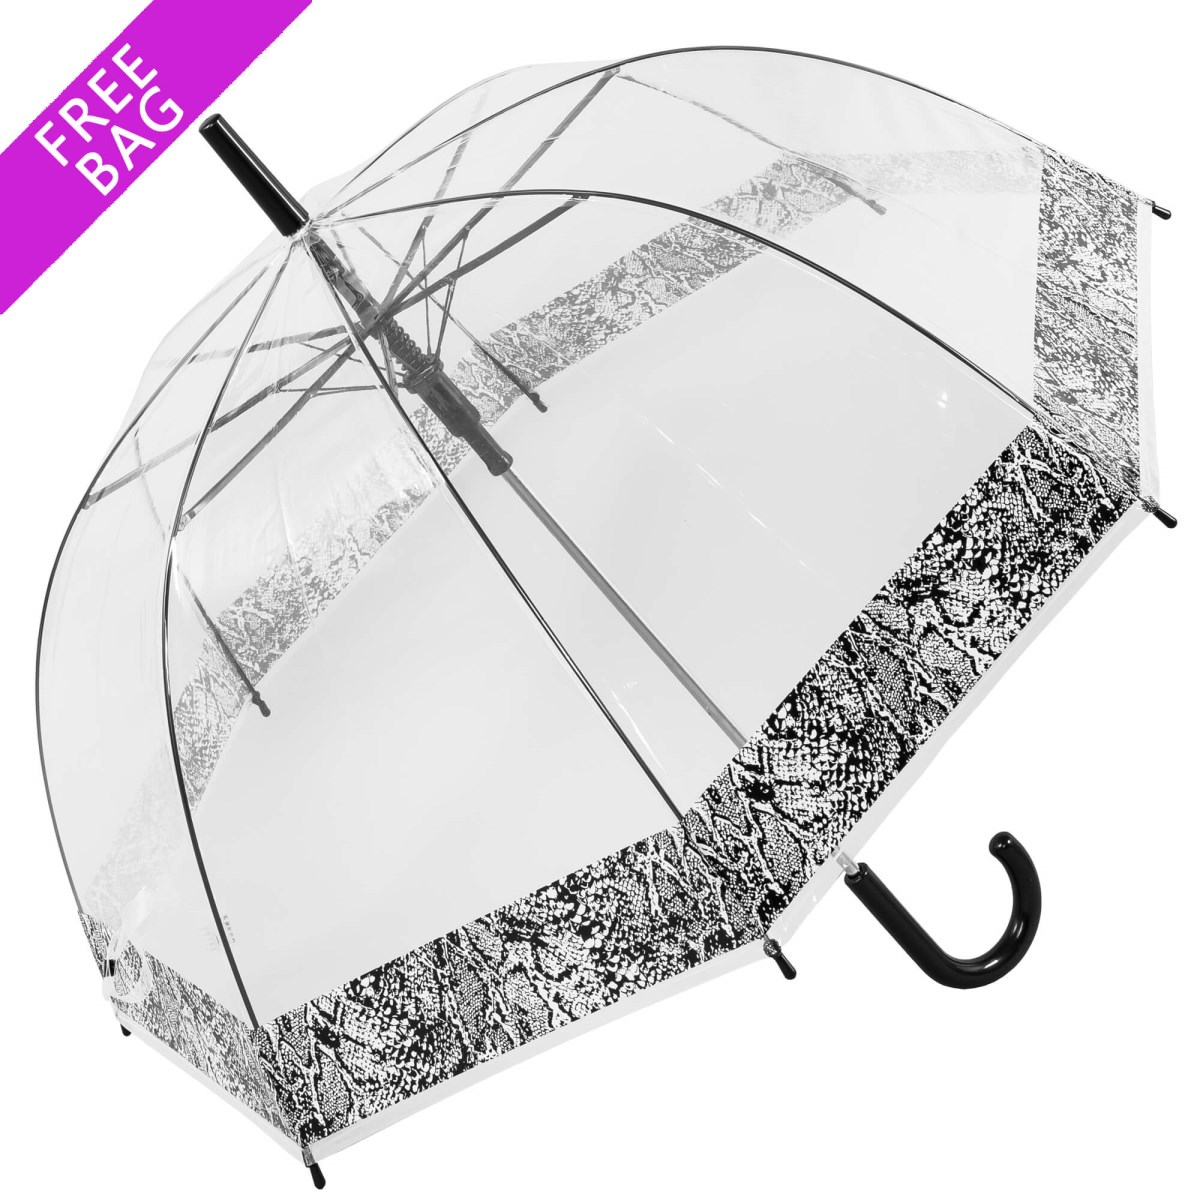 Auto Snakeskin Bordered Clear Umbrella With Free bag (18012)